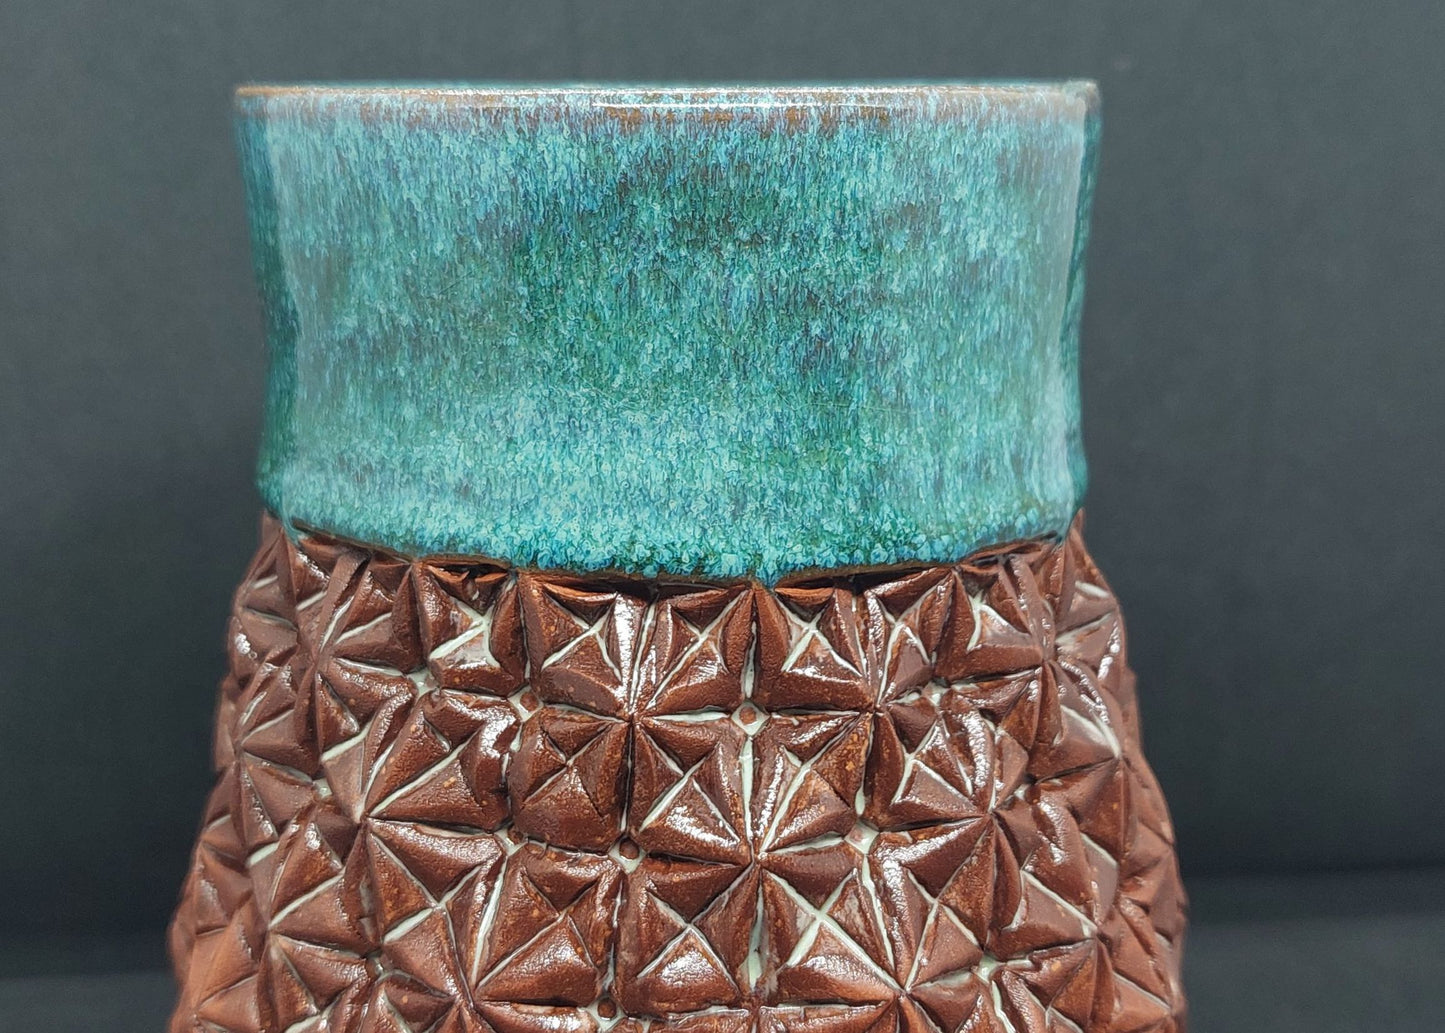 Green vase on red clay - origami pattern